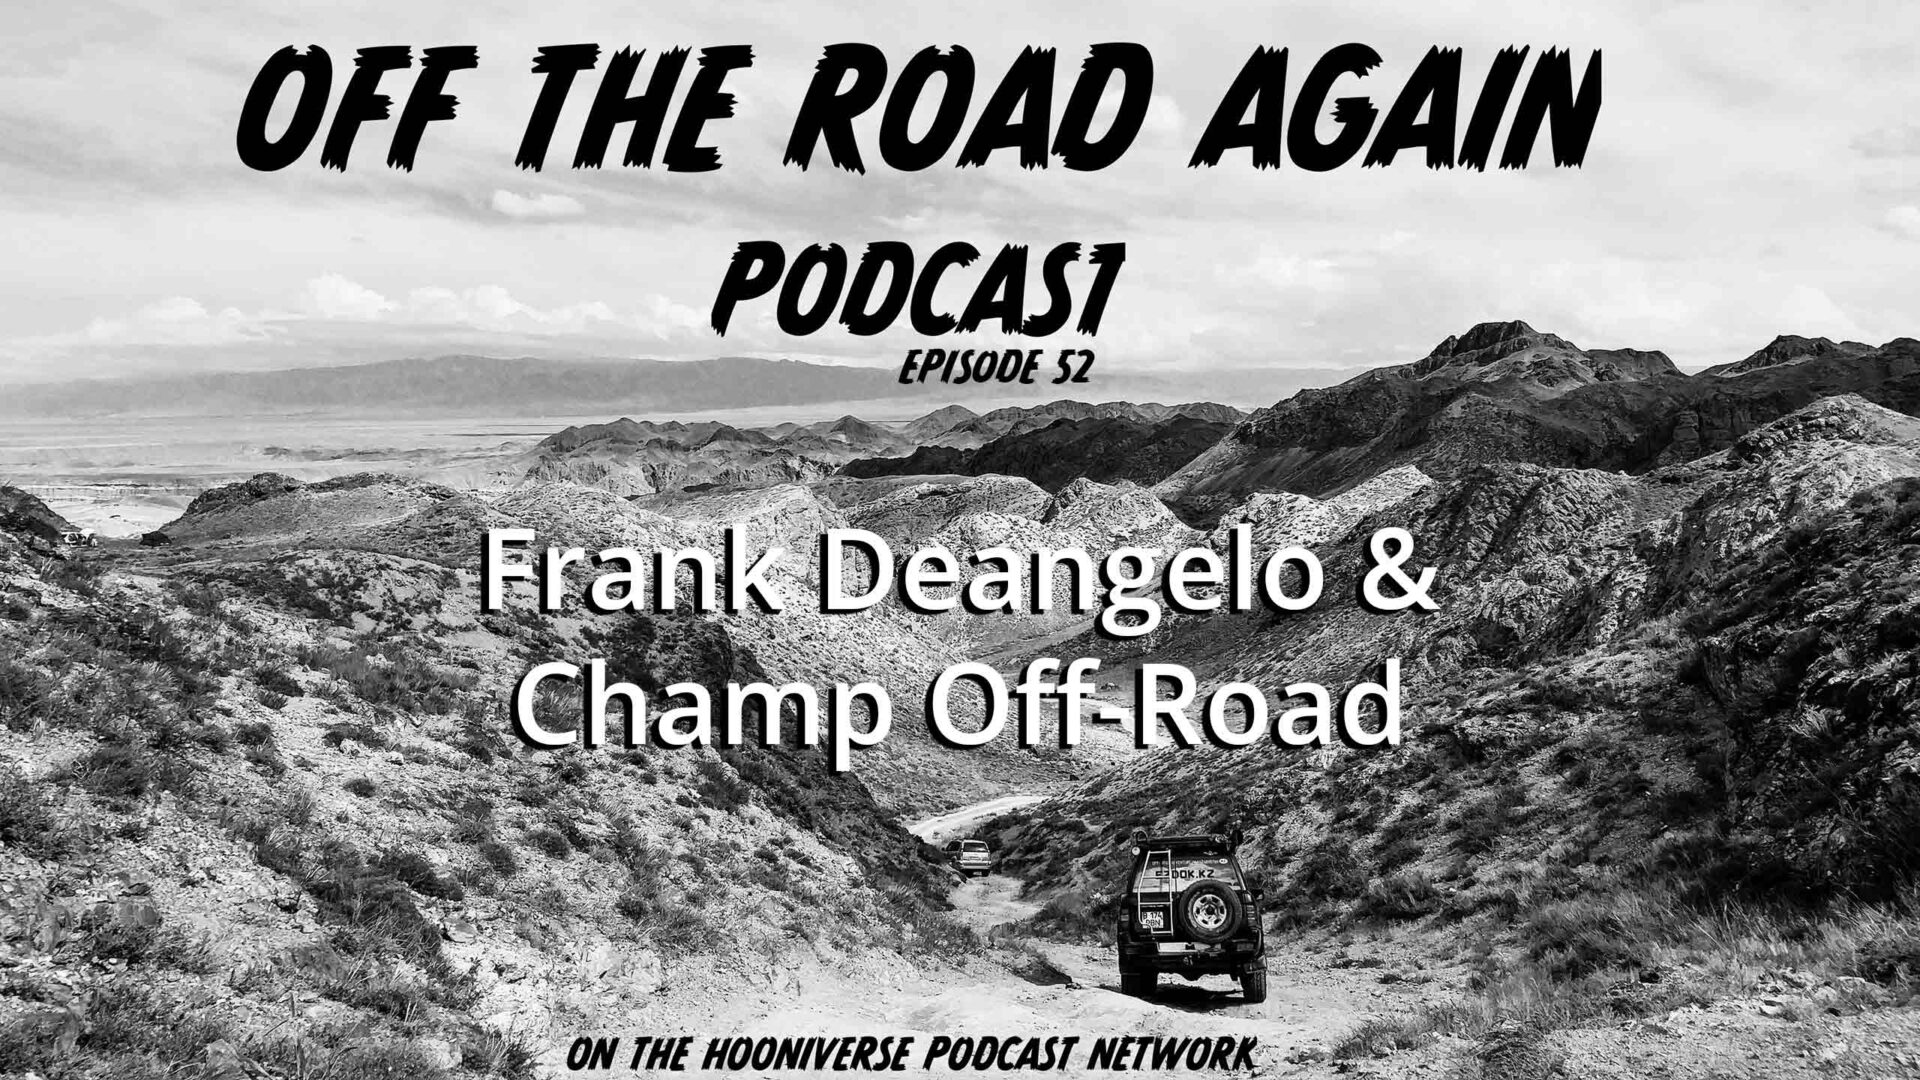 Frank-Deangelo-Champ-Off-Road-Off-The-Road-Again-Podcast-Episode-52